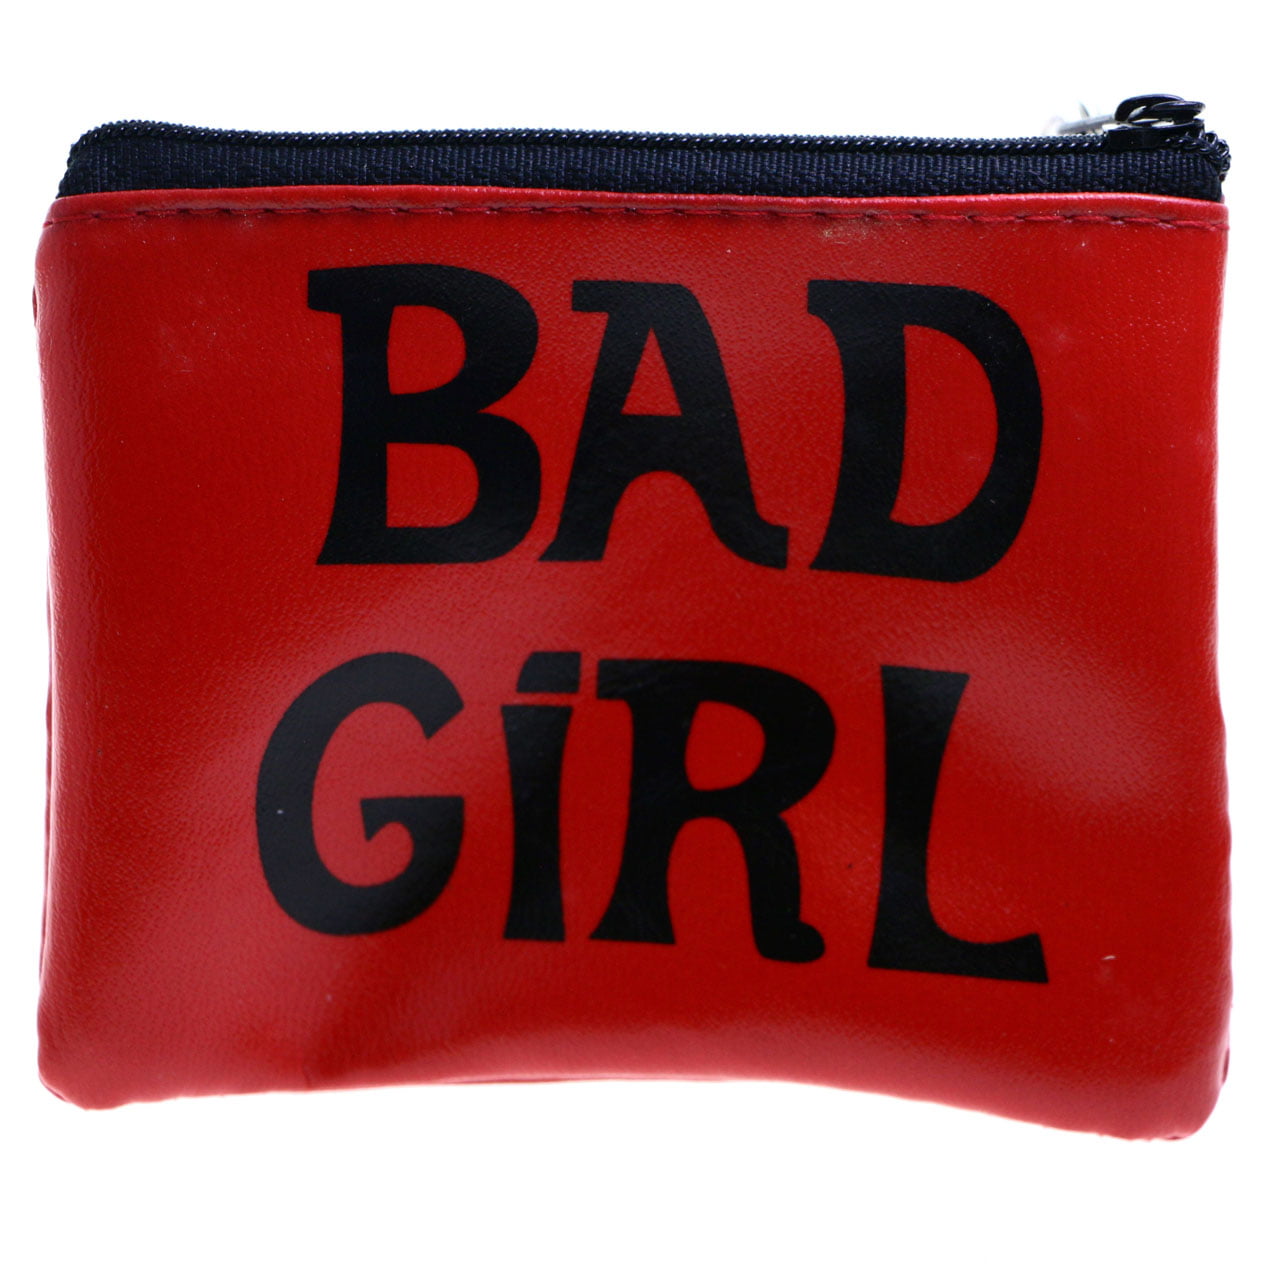 Mi Amore - Bad Girl Coin-Purse-Keychain Red/Black - mediakits.theygsgroup.com - mediakits.theygsgroup.com